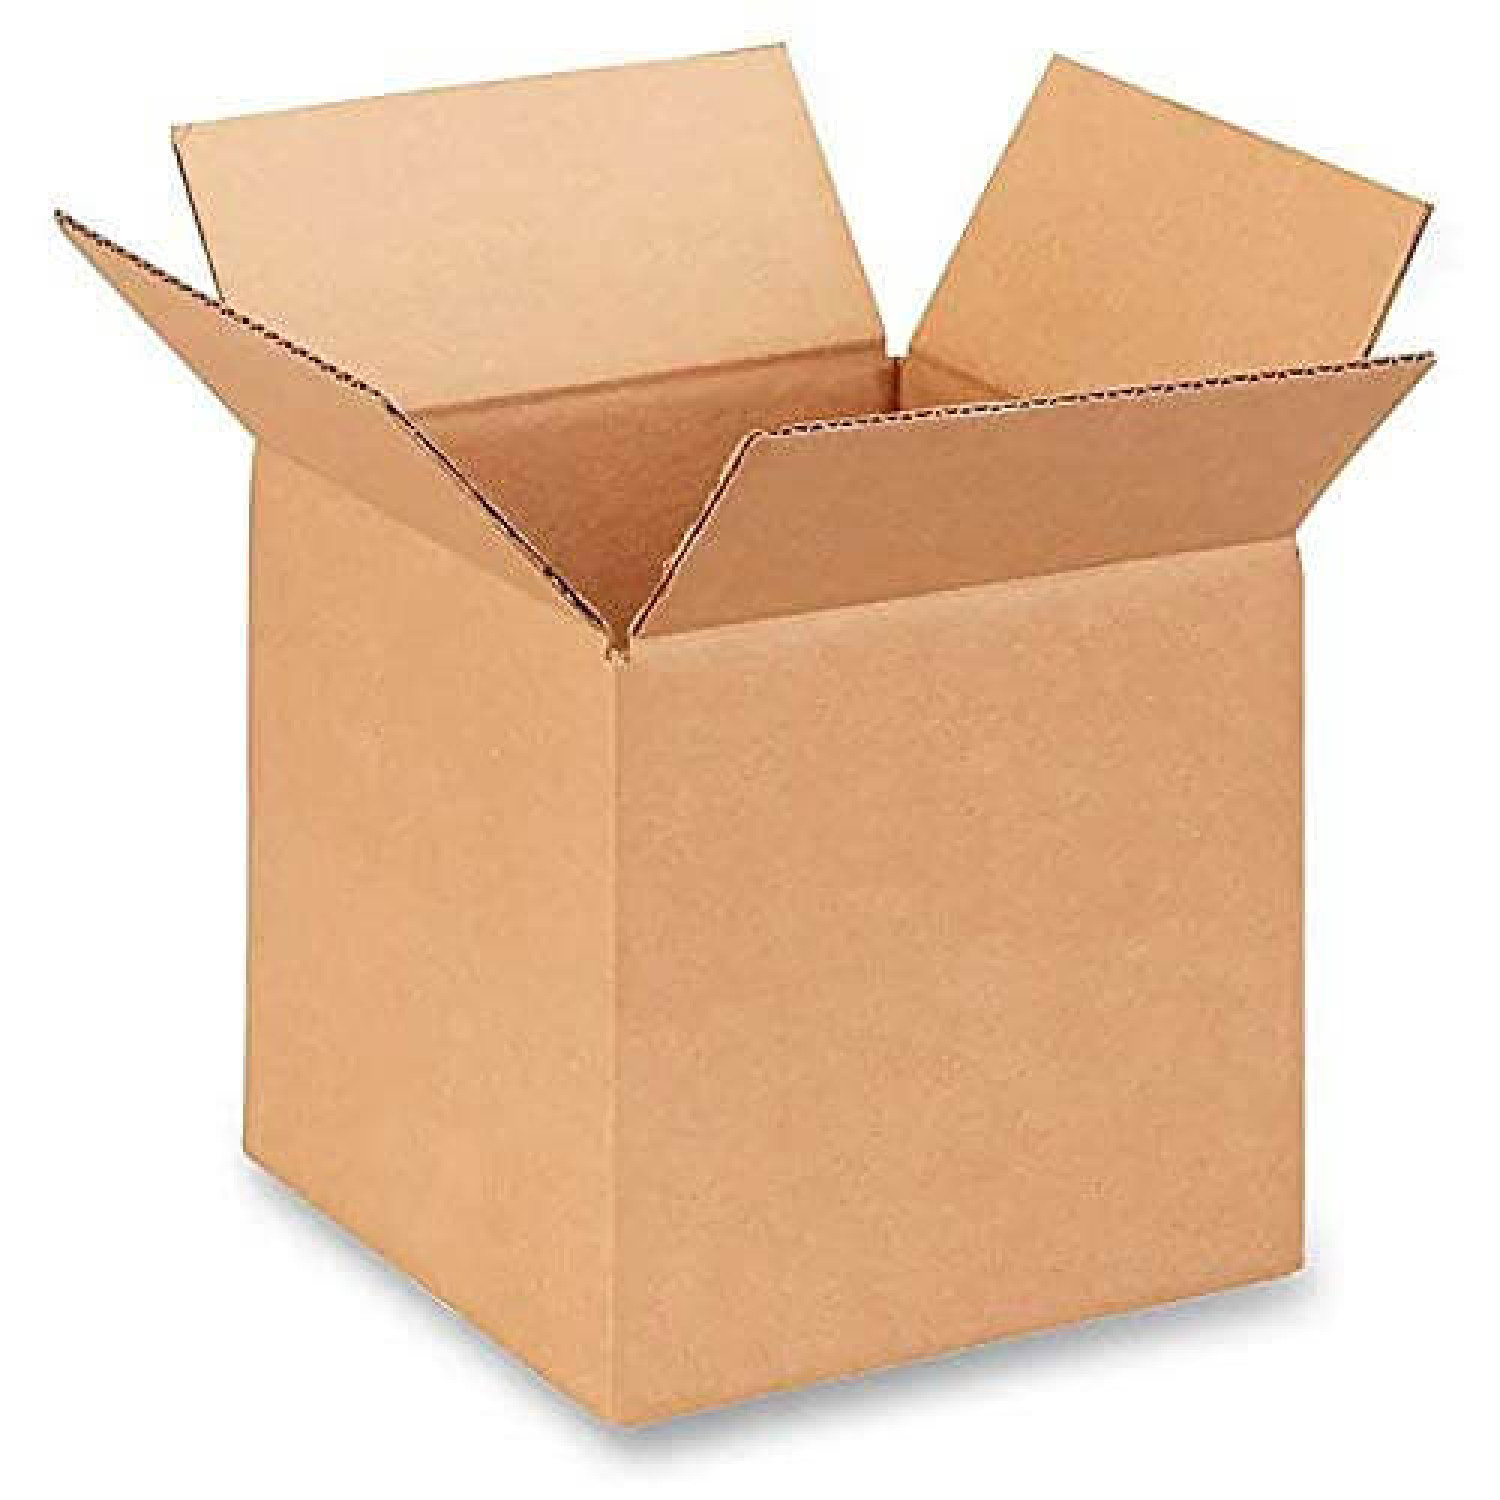 Duck 6-in W x 6-in H x 6-in D Small Recycled Cardboard Moving Box